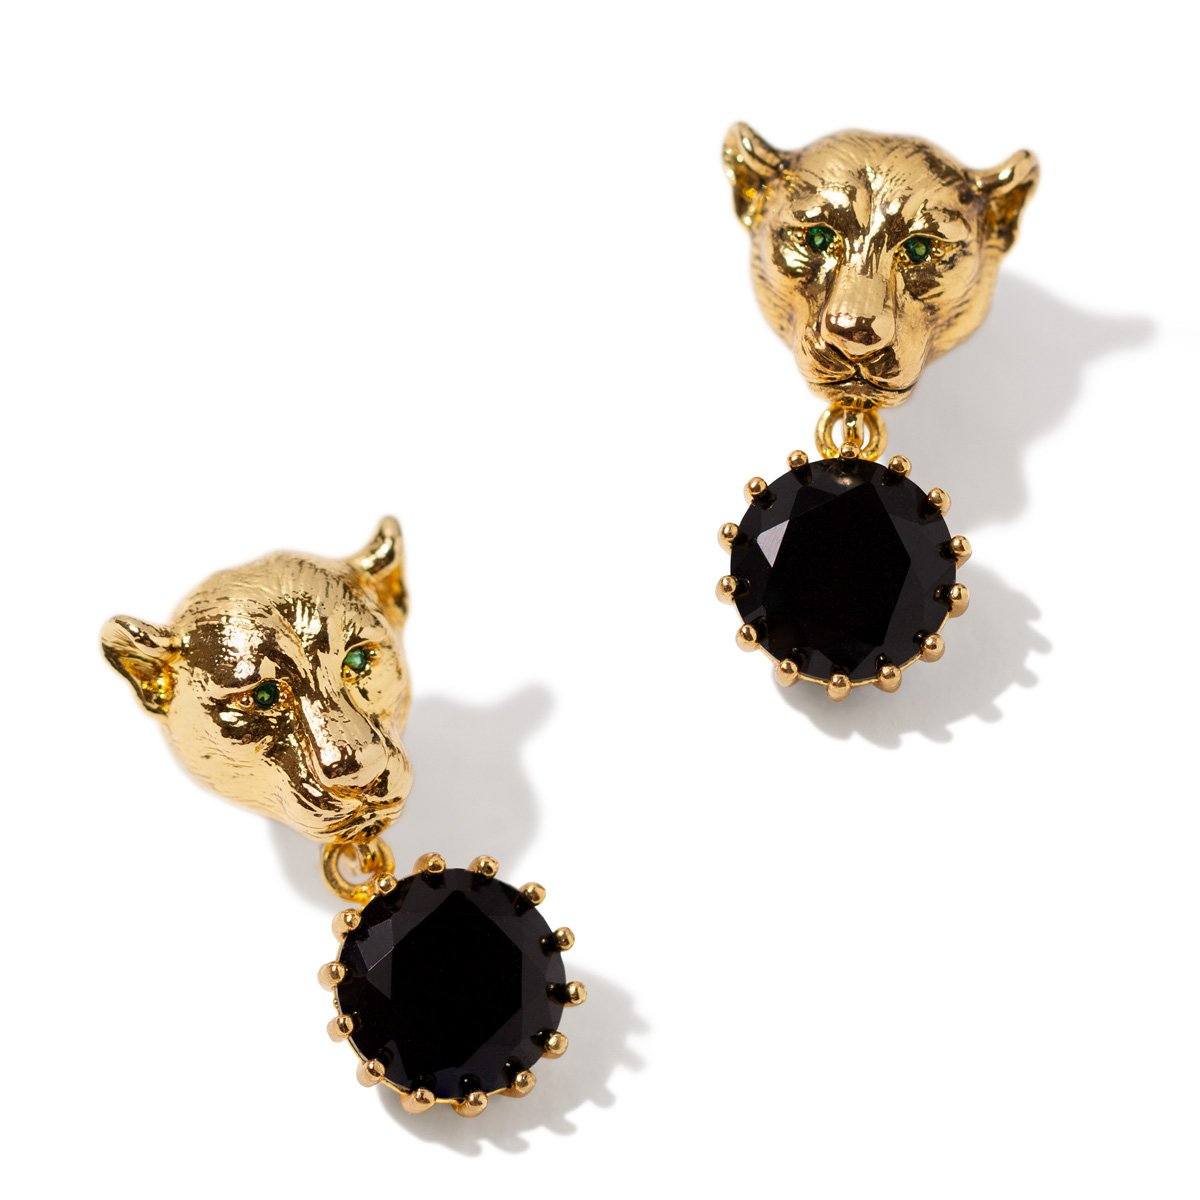 Lioness Earrings With Black CZ Stones Vinty Jewelry